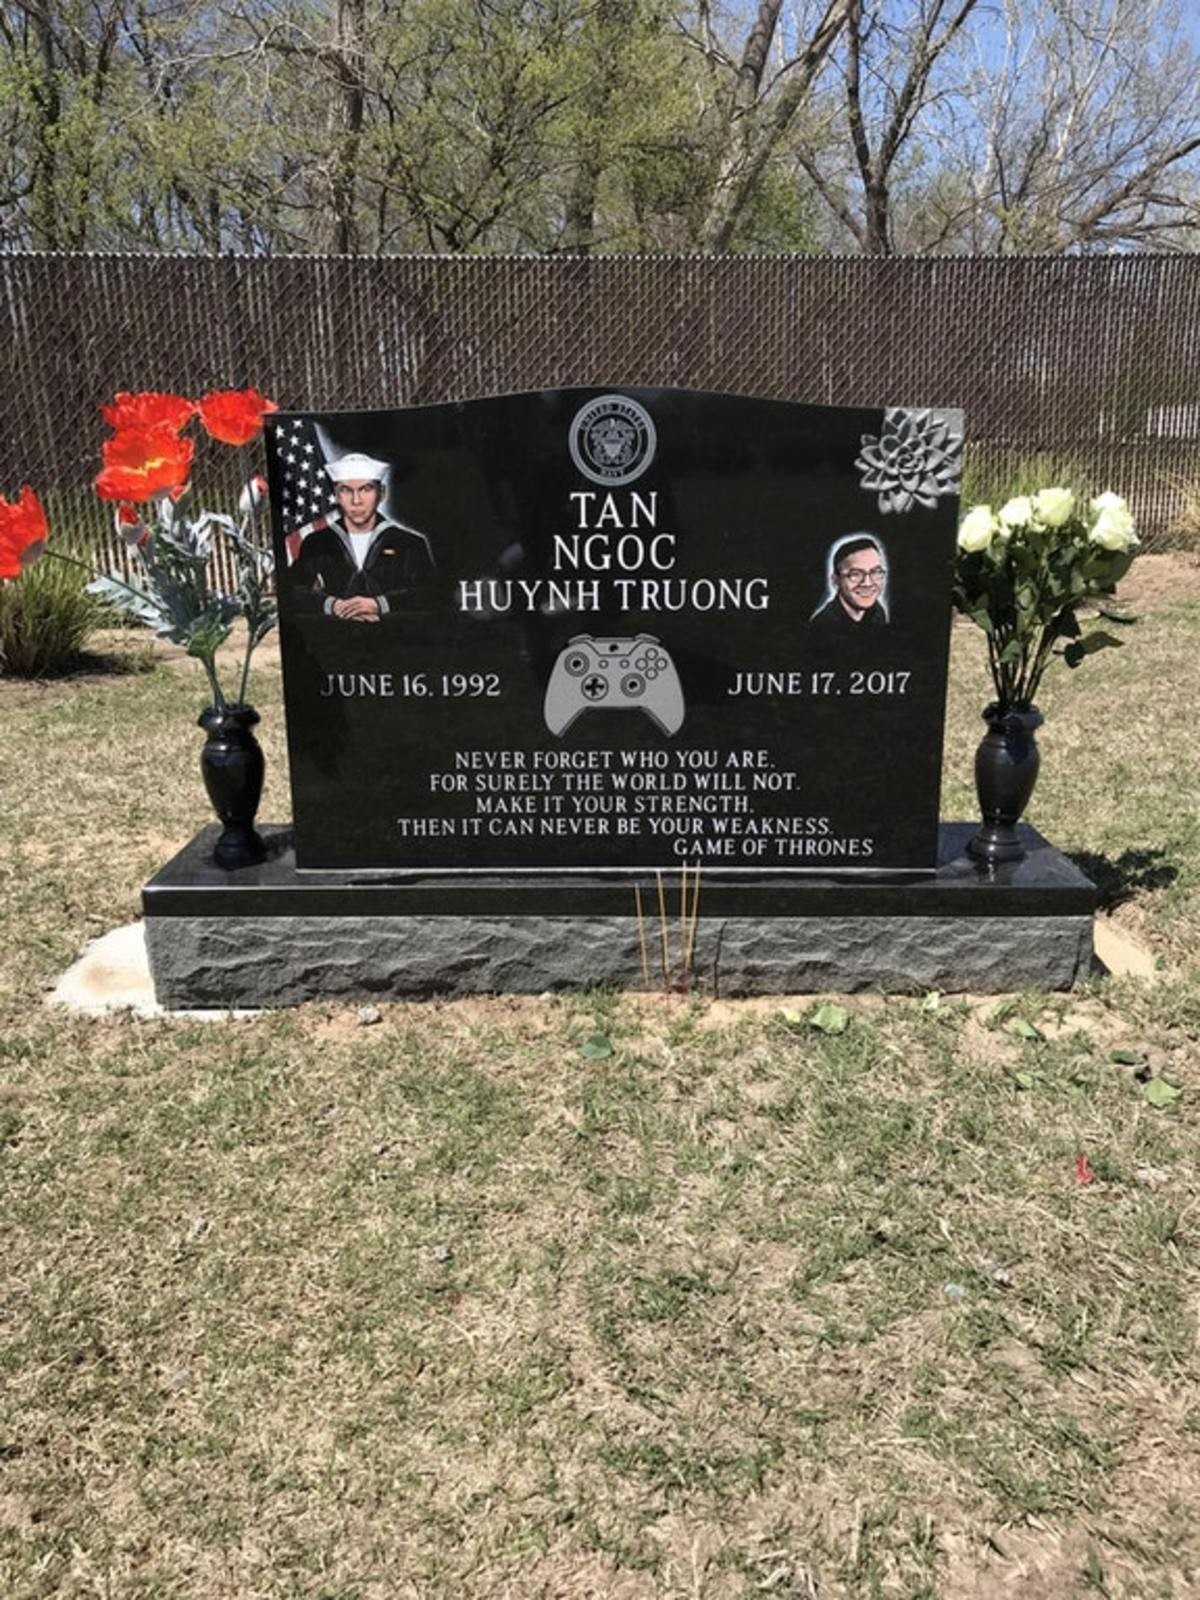 Headstone From Sailor That Died Last Year. This is making news, so I thought I would share it here. Dude was a Gamer. brotherstombstoneafterhispassingfrom_the/ 